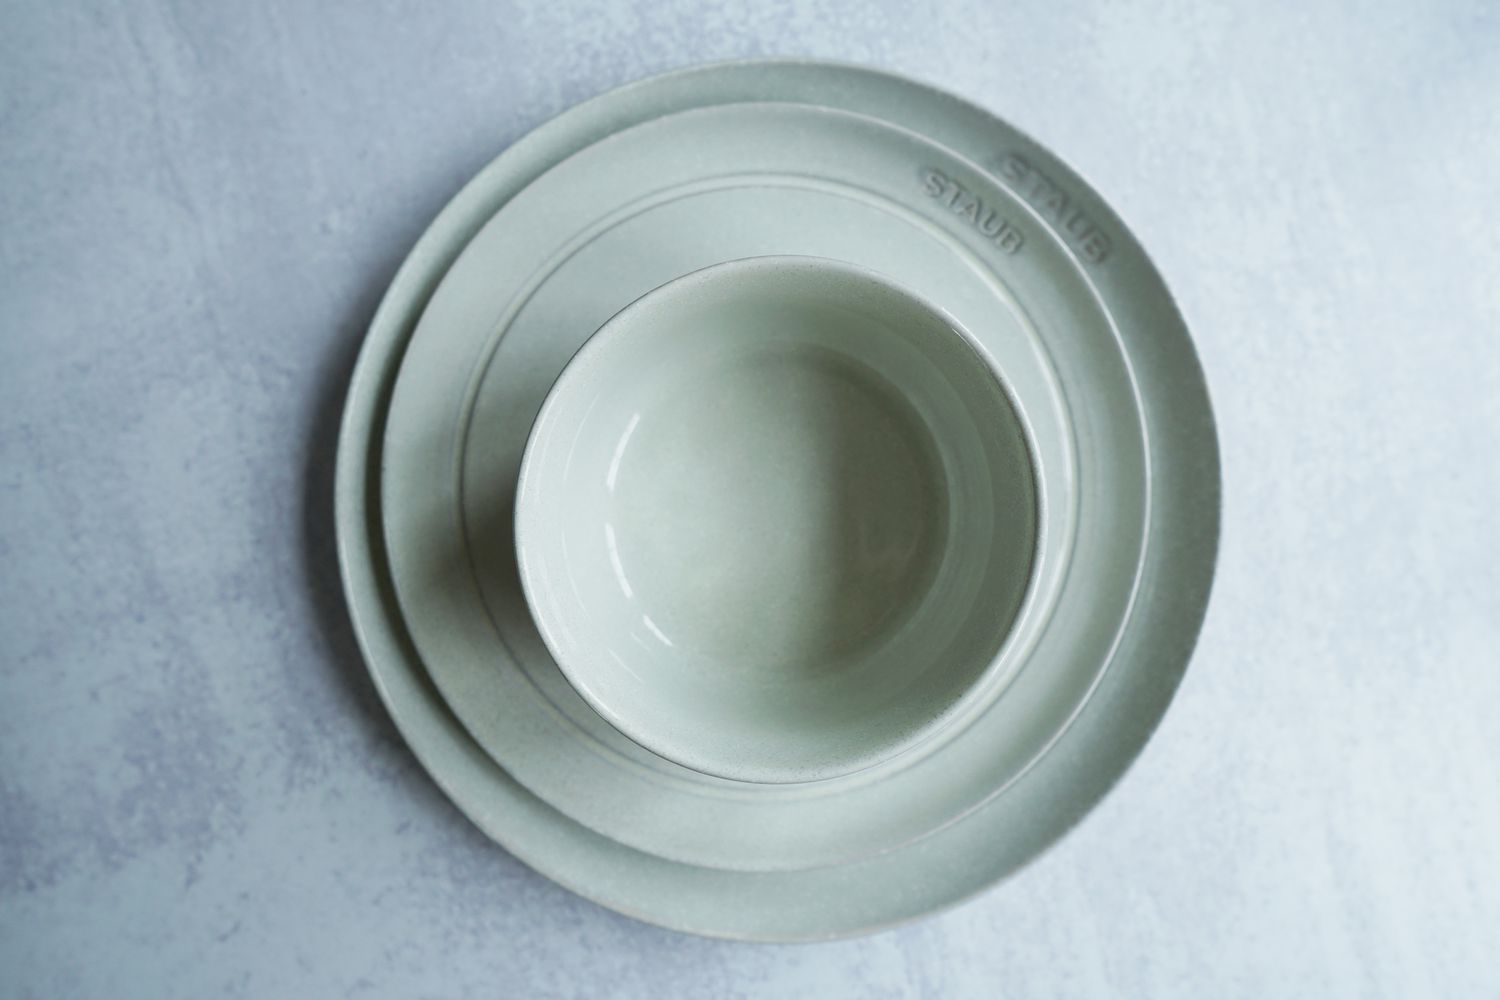 a Staub, white dinnerware place setting on a grey surface